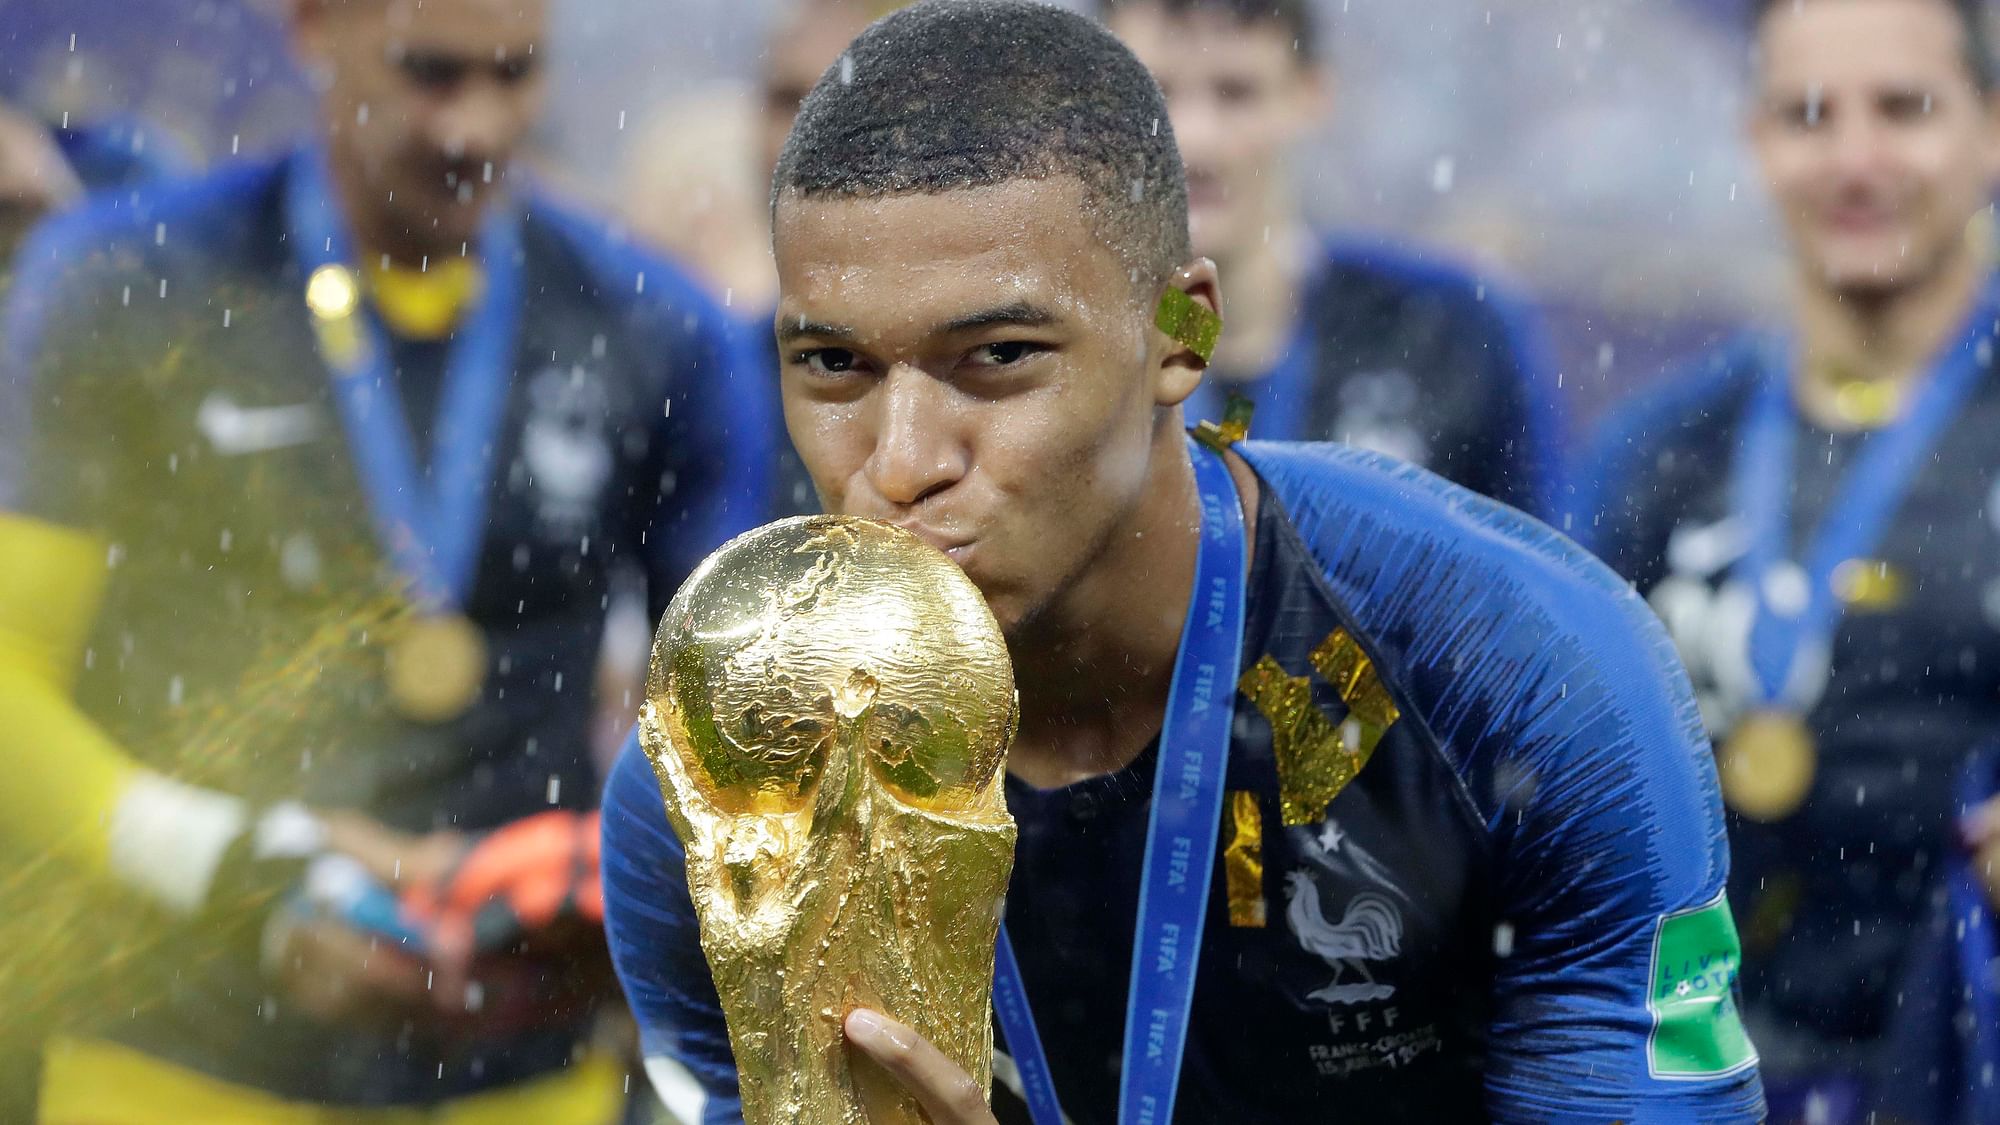 France’s Kylian Mbappe kisses the trophy after the final match between France and Croatia at the 2018 FIFA World Cup in the Luzhniki Stadium in Moscow, Russia, Sunday, July 15, 2018. France won the final 4-2.